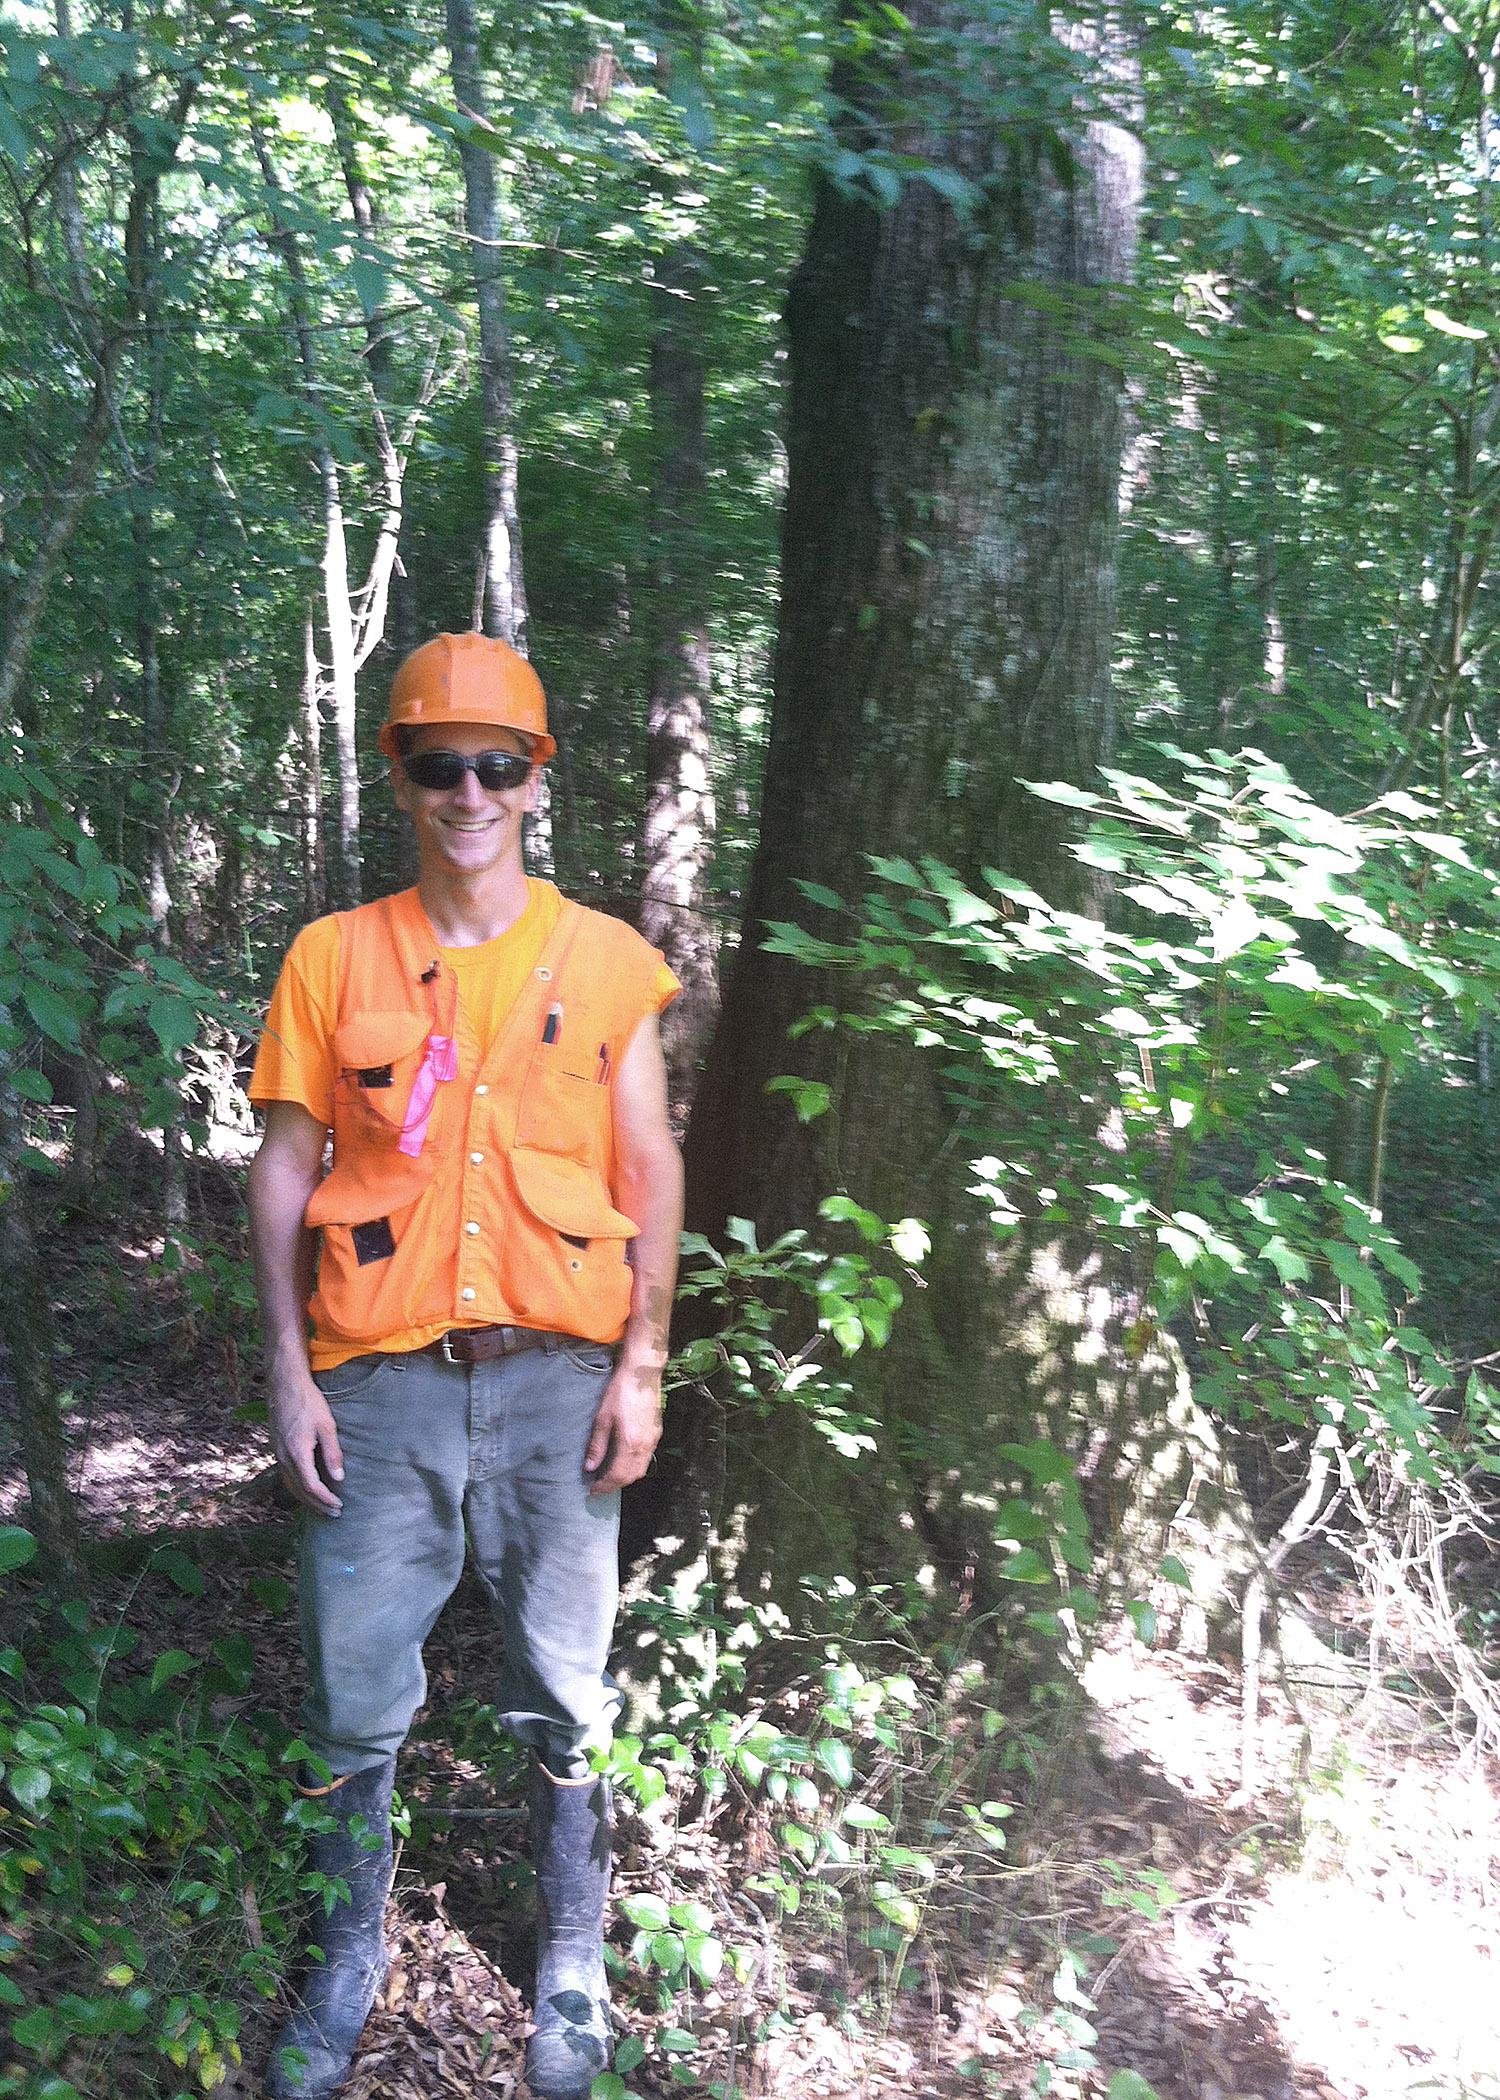 Mississippi State University senior Zach Senneff is the recipient of the Harold Weaver Undergraduate Student Excellence Award for his research on the flammability of hardwood forests. (Submitted photo)